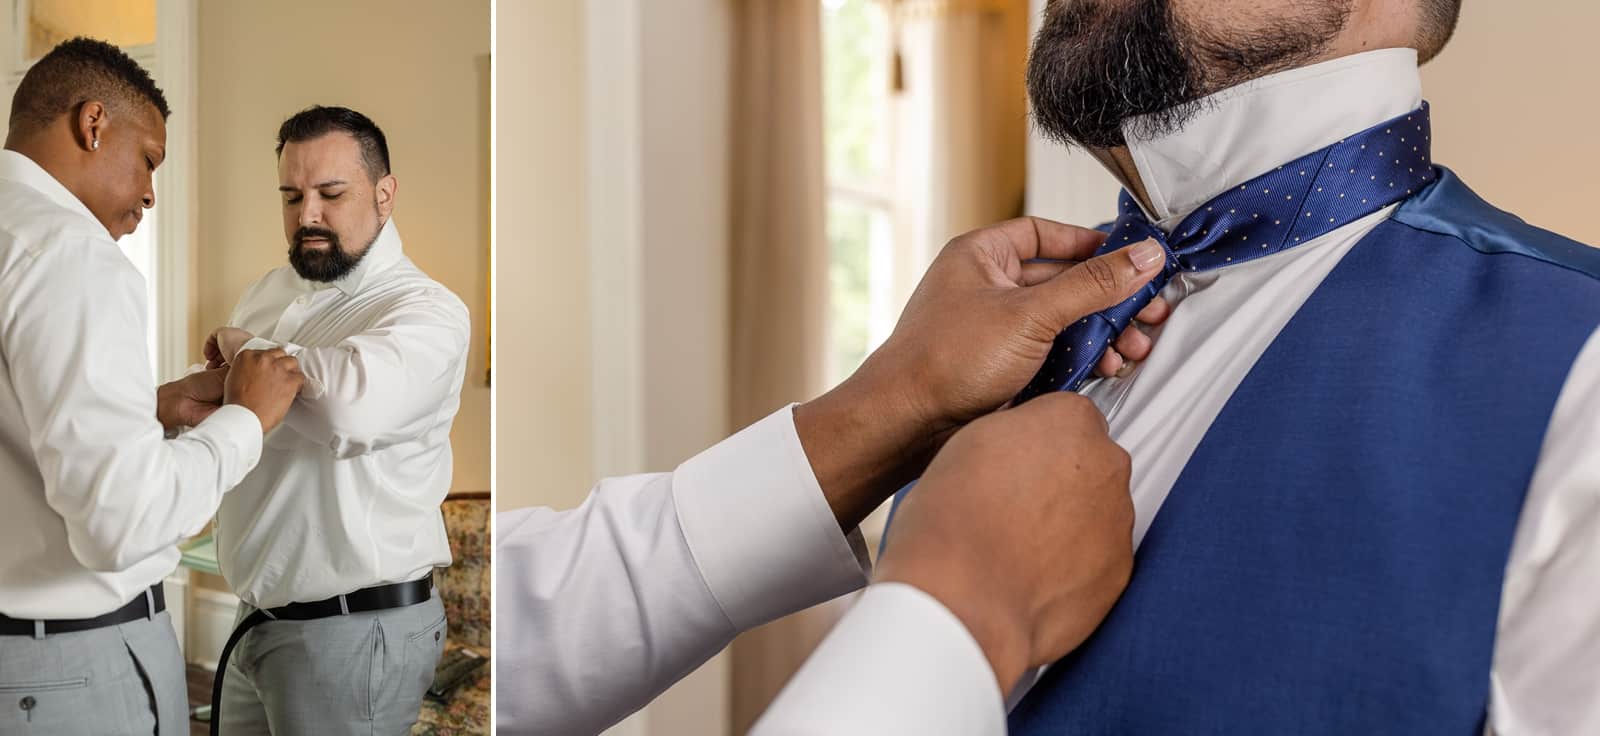 Same sex couple get dressed and straighten tie for their wedding